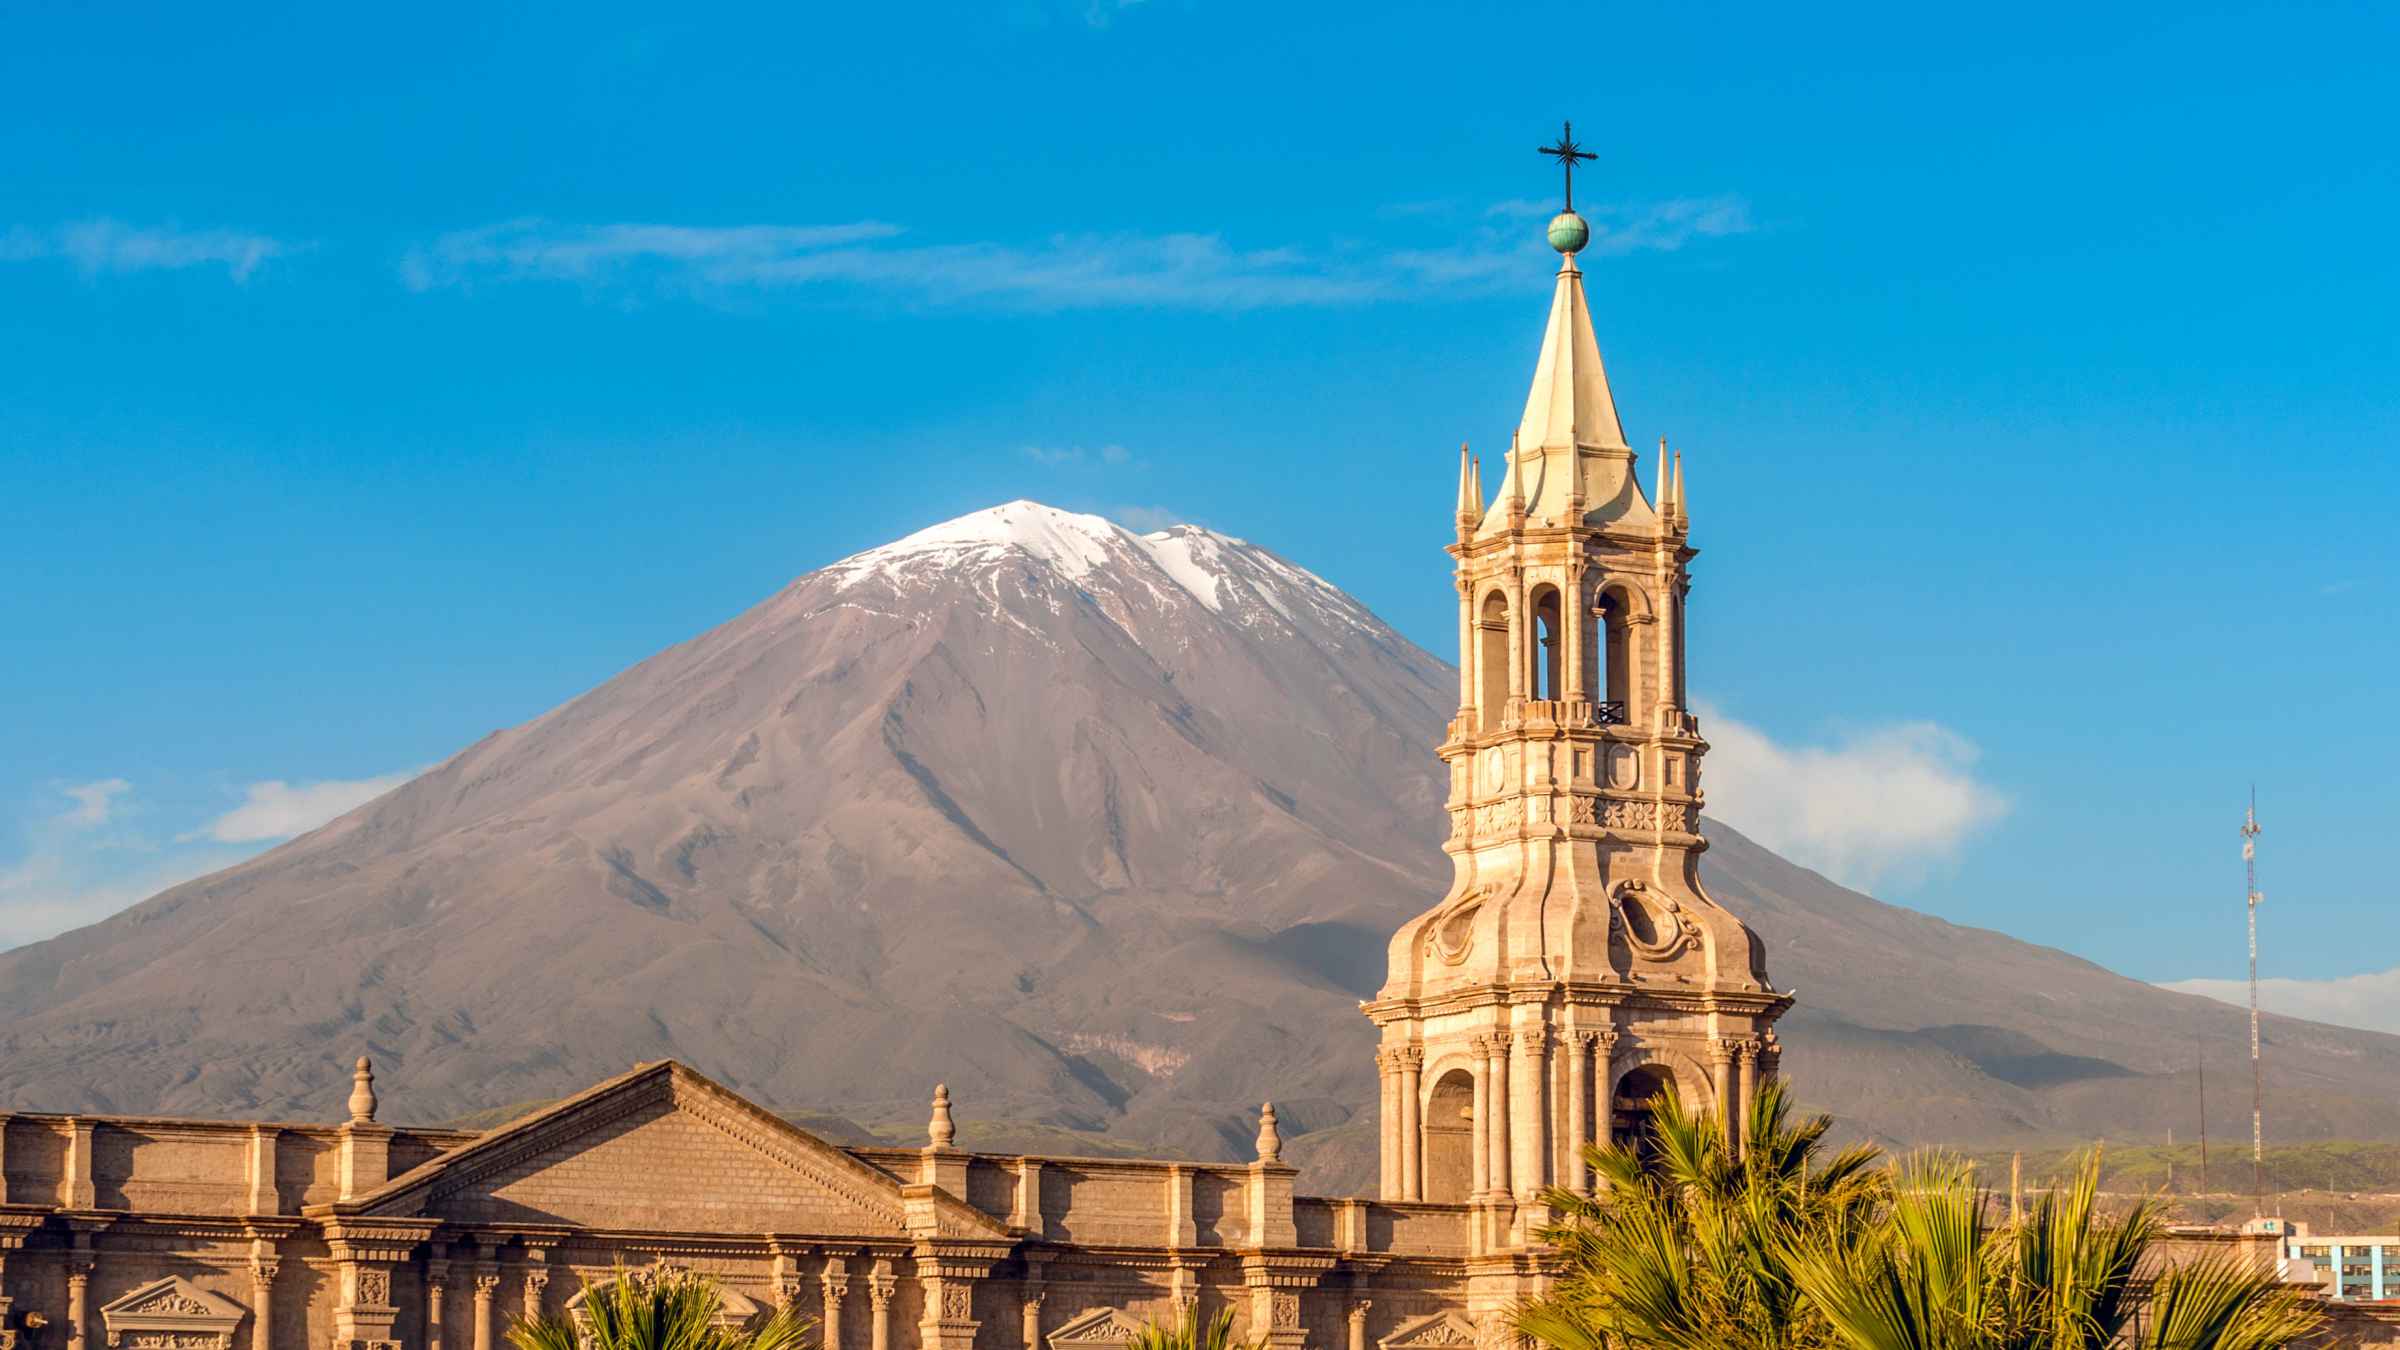 Arequipa Region 2021 Top 10 Tours And Activities With Photos Things